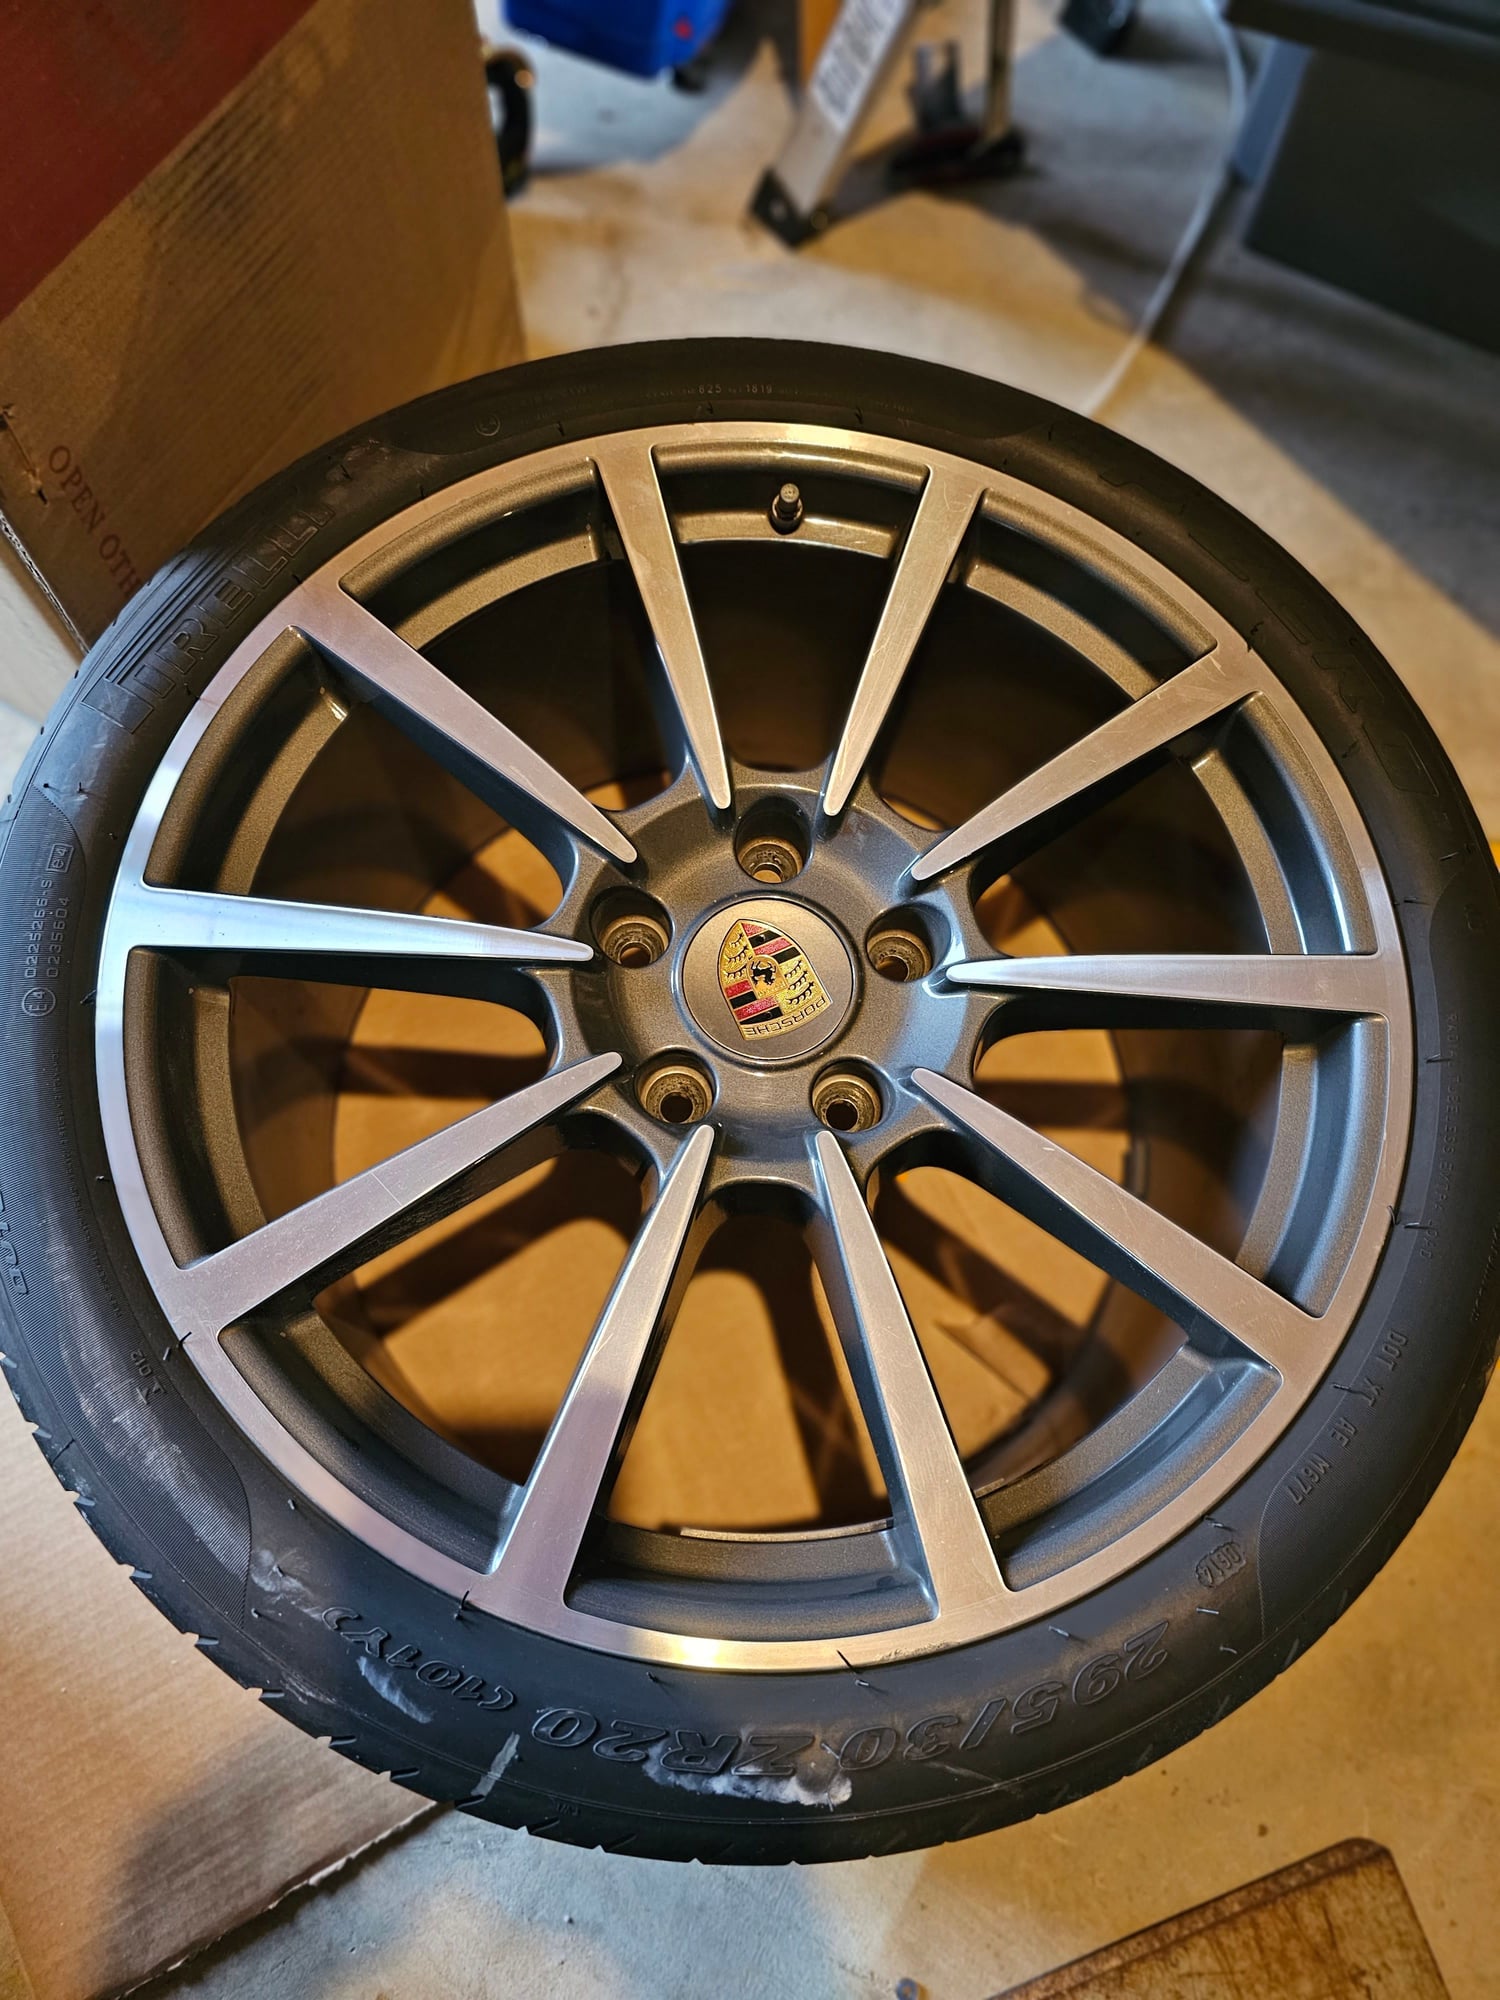 Wheels and Tires/Axles - 20" 991 Sport Classic wheels with TPMS and colored center caps - Used - 2012 to 2016 Porsche 911 - Purcellville, VA 20132, United States